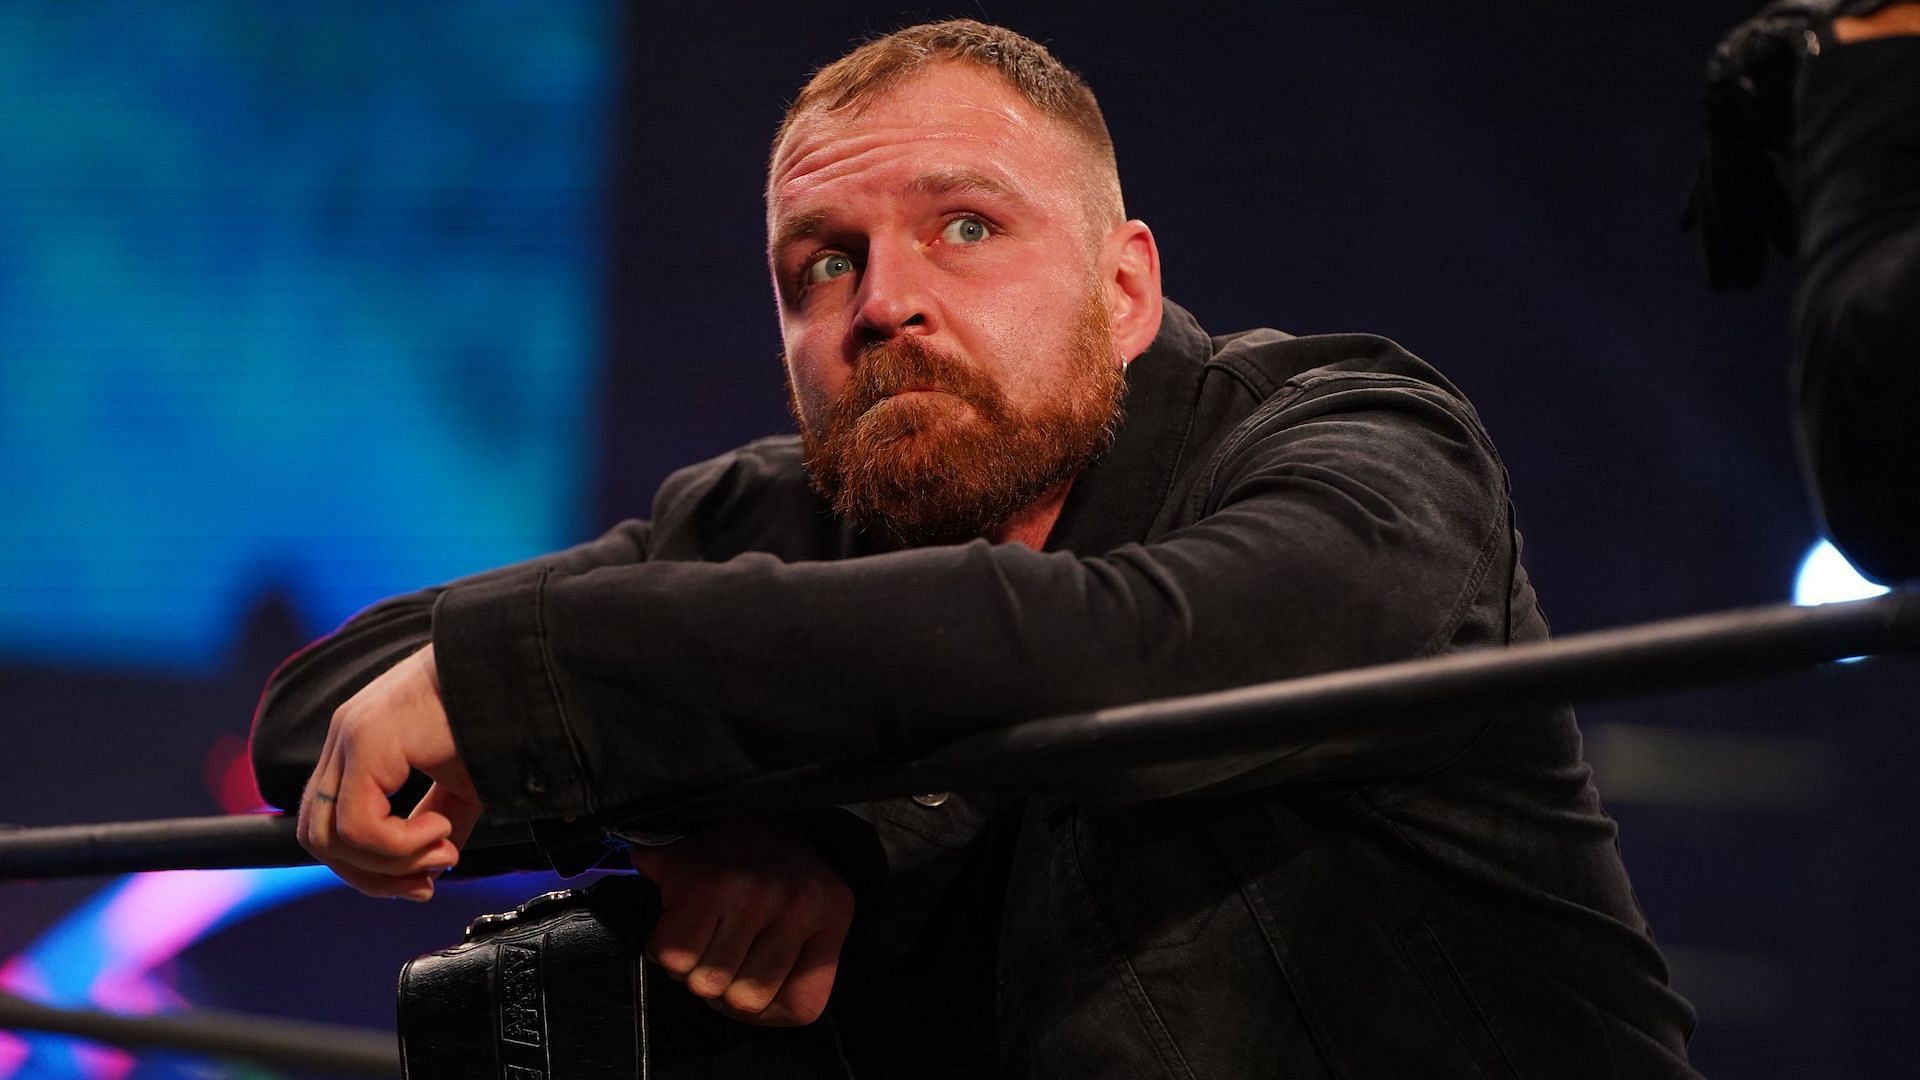 The former AEW Champion is one of the biggest babyfaces in wrestling.